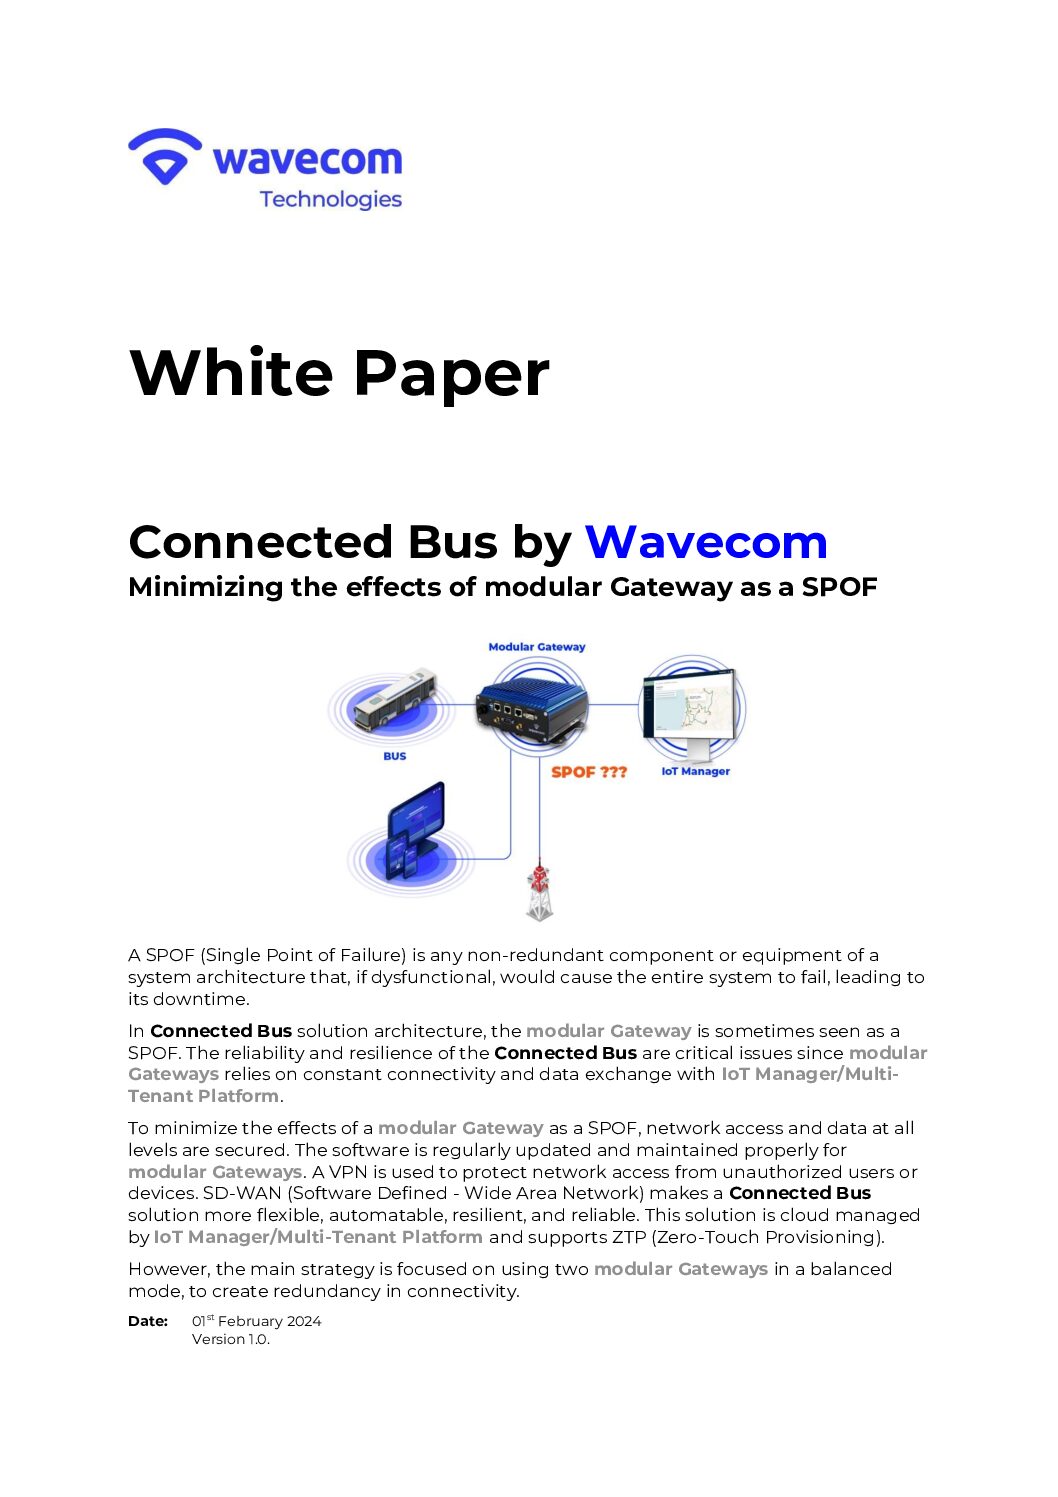 Connected Bus by Wavecom